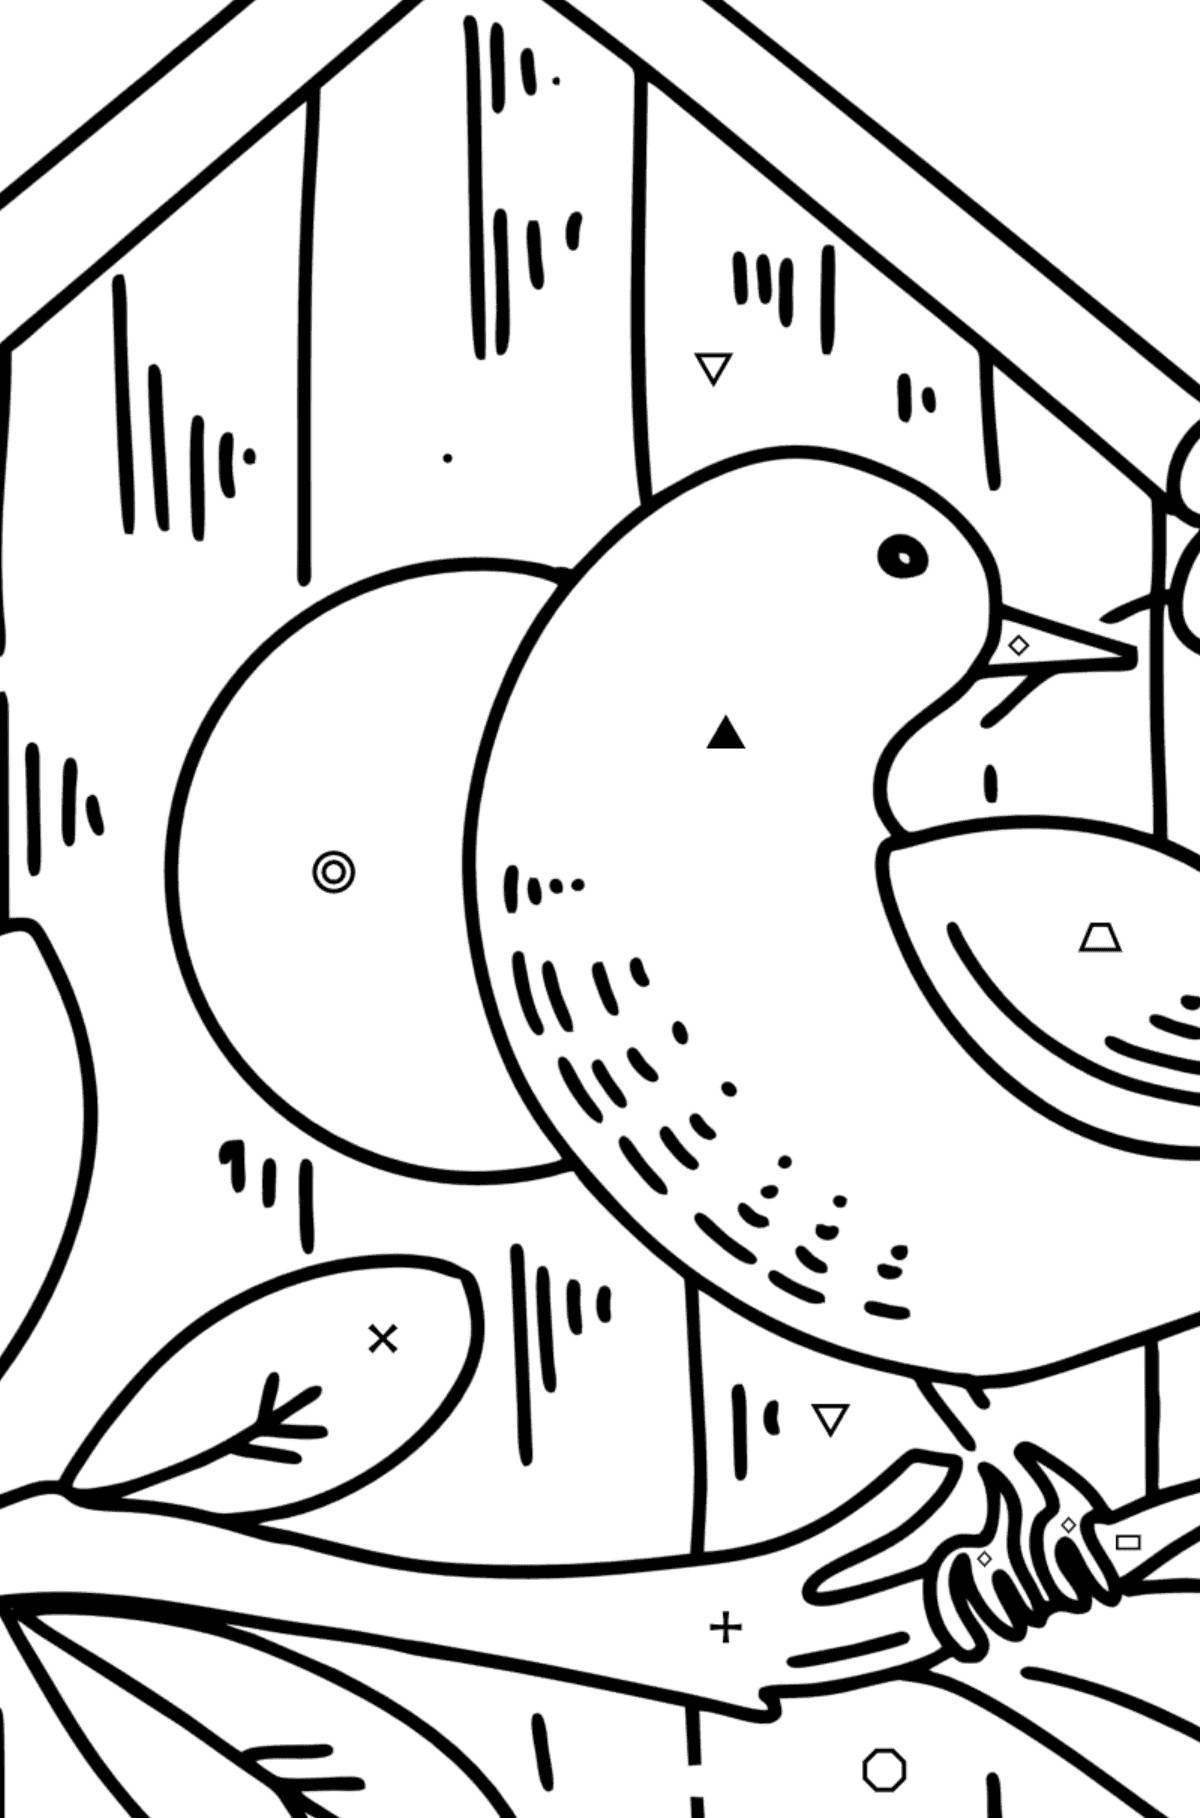 Playful birdhouse coloring page for 3-4 year olds